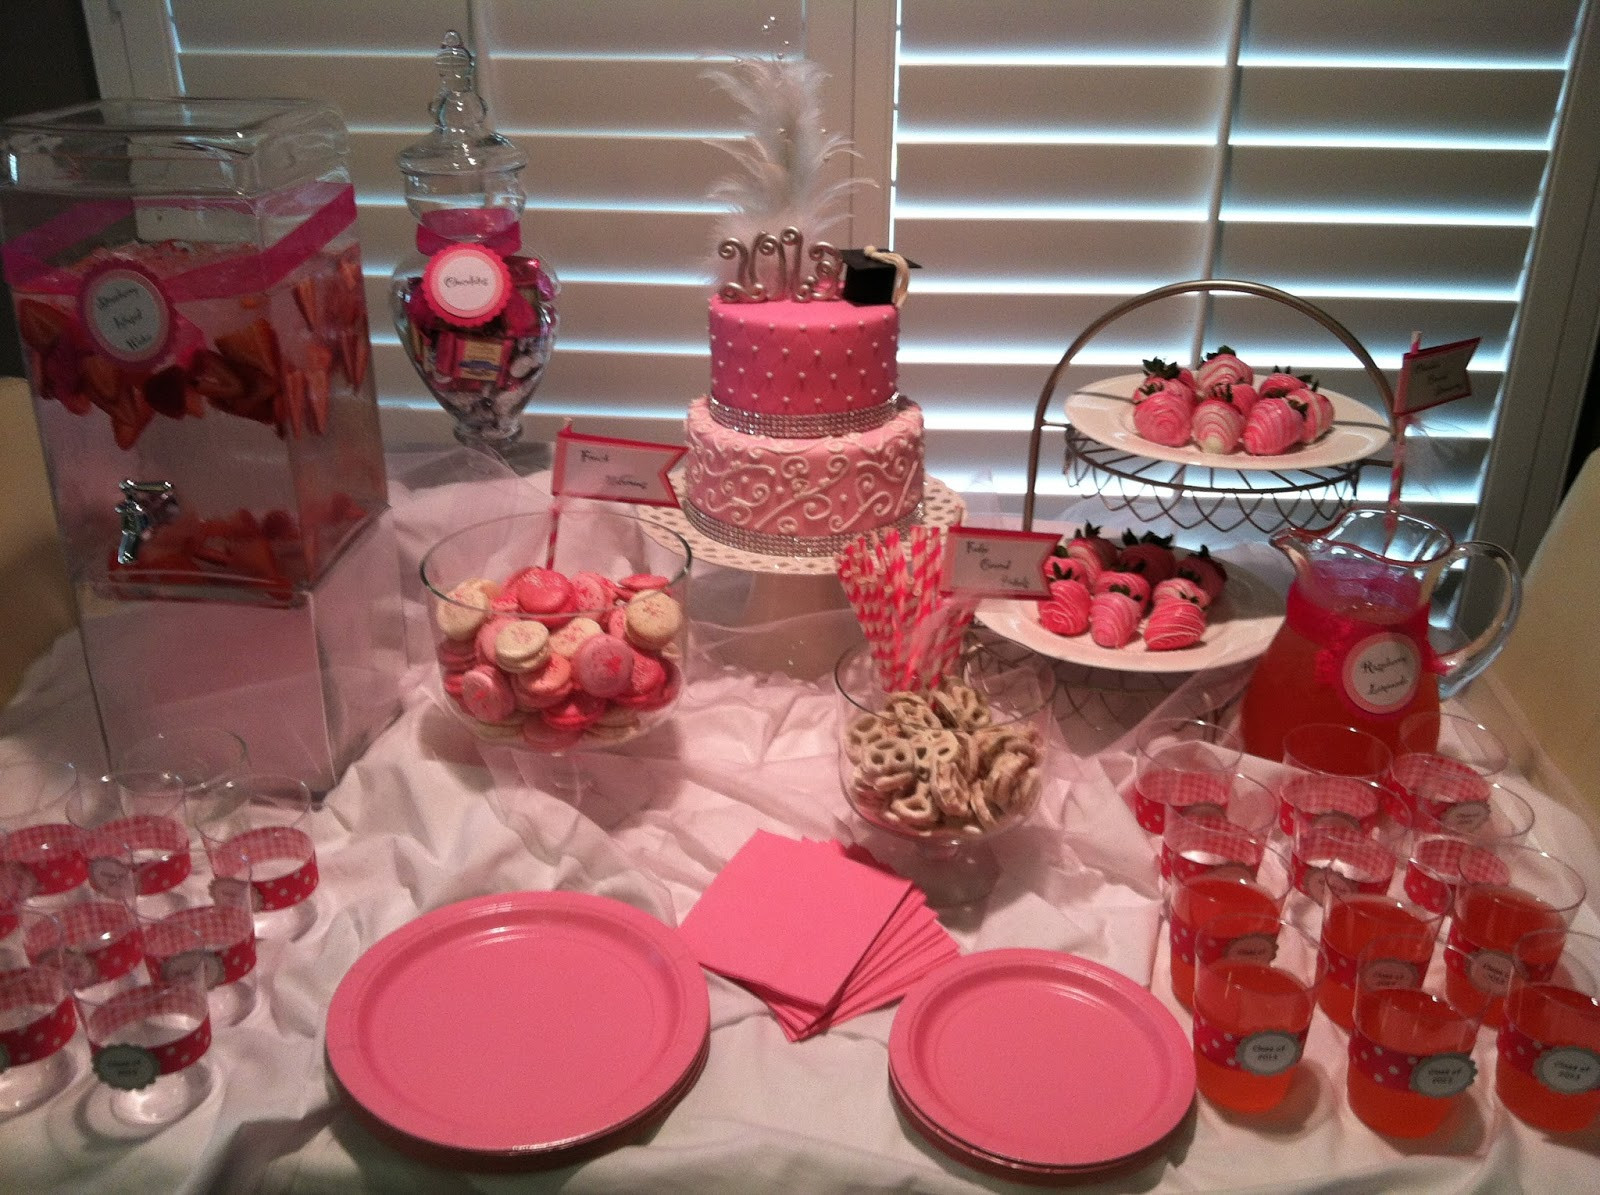 Pink Graduation Party Ideas
 A Little Something Sweet Pink Graduation Party